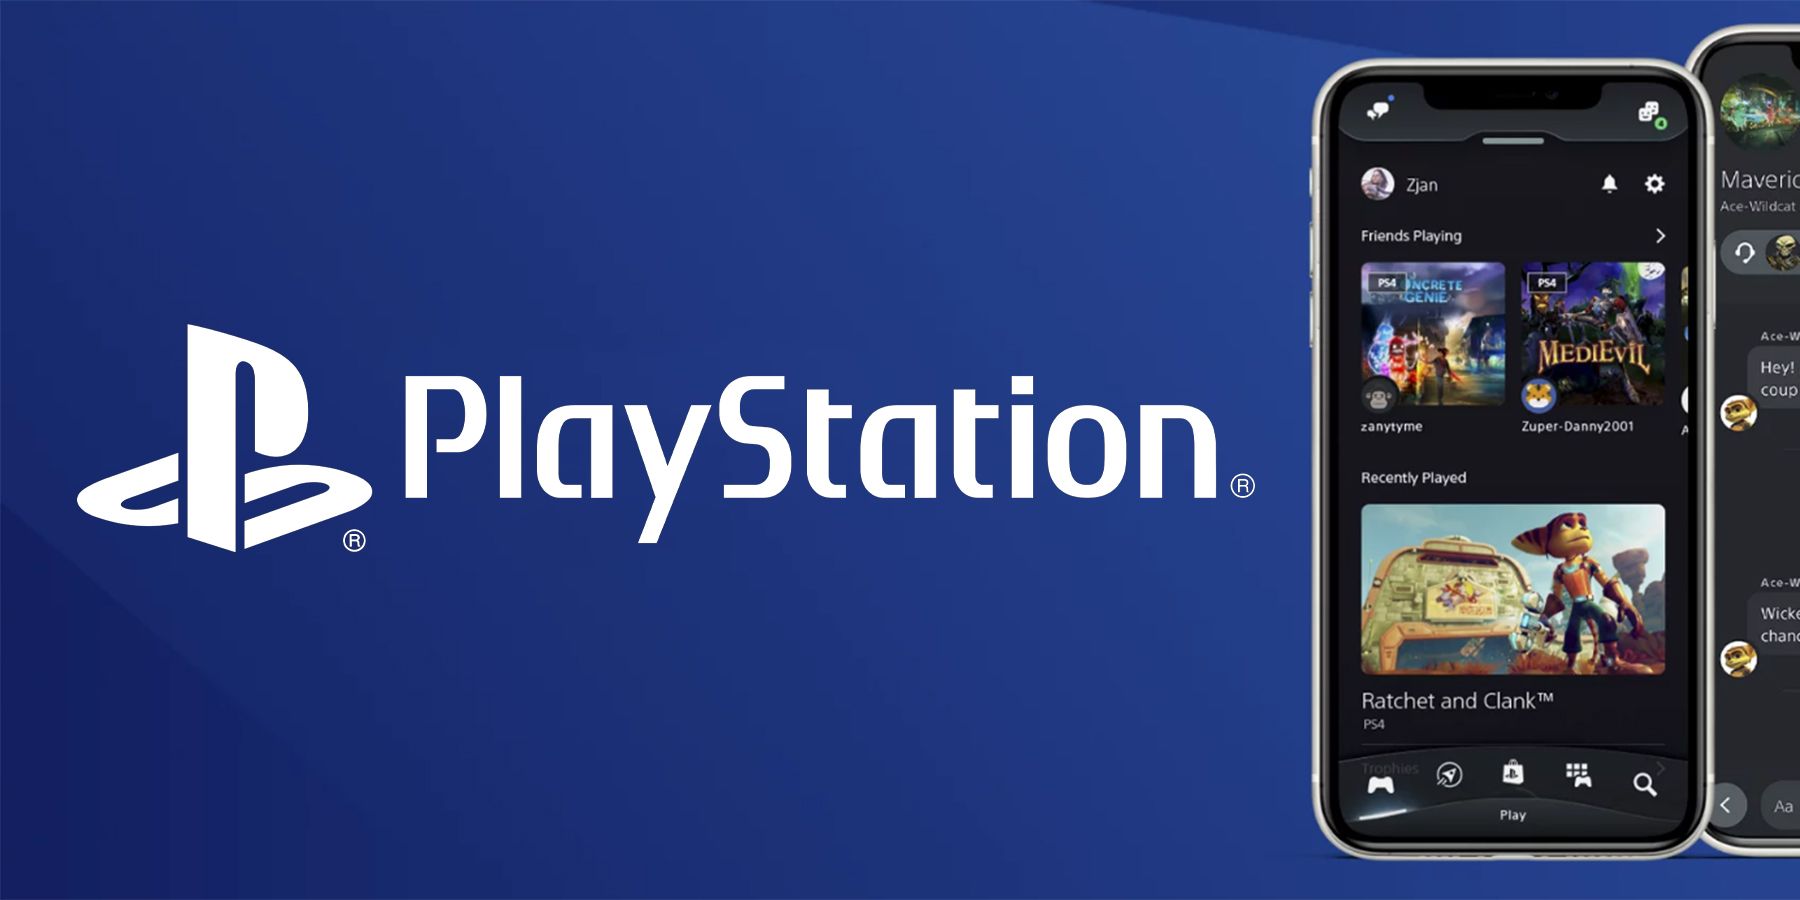 Playstation app search updates